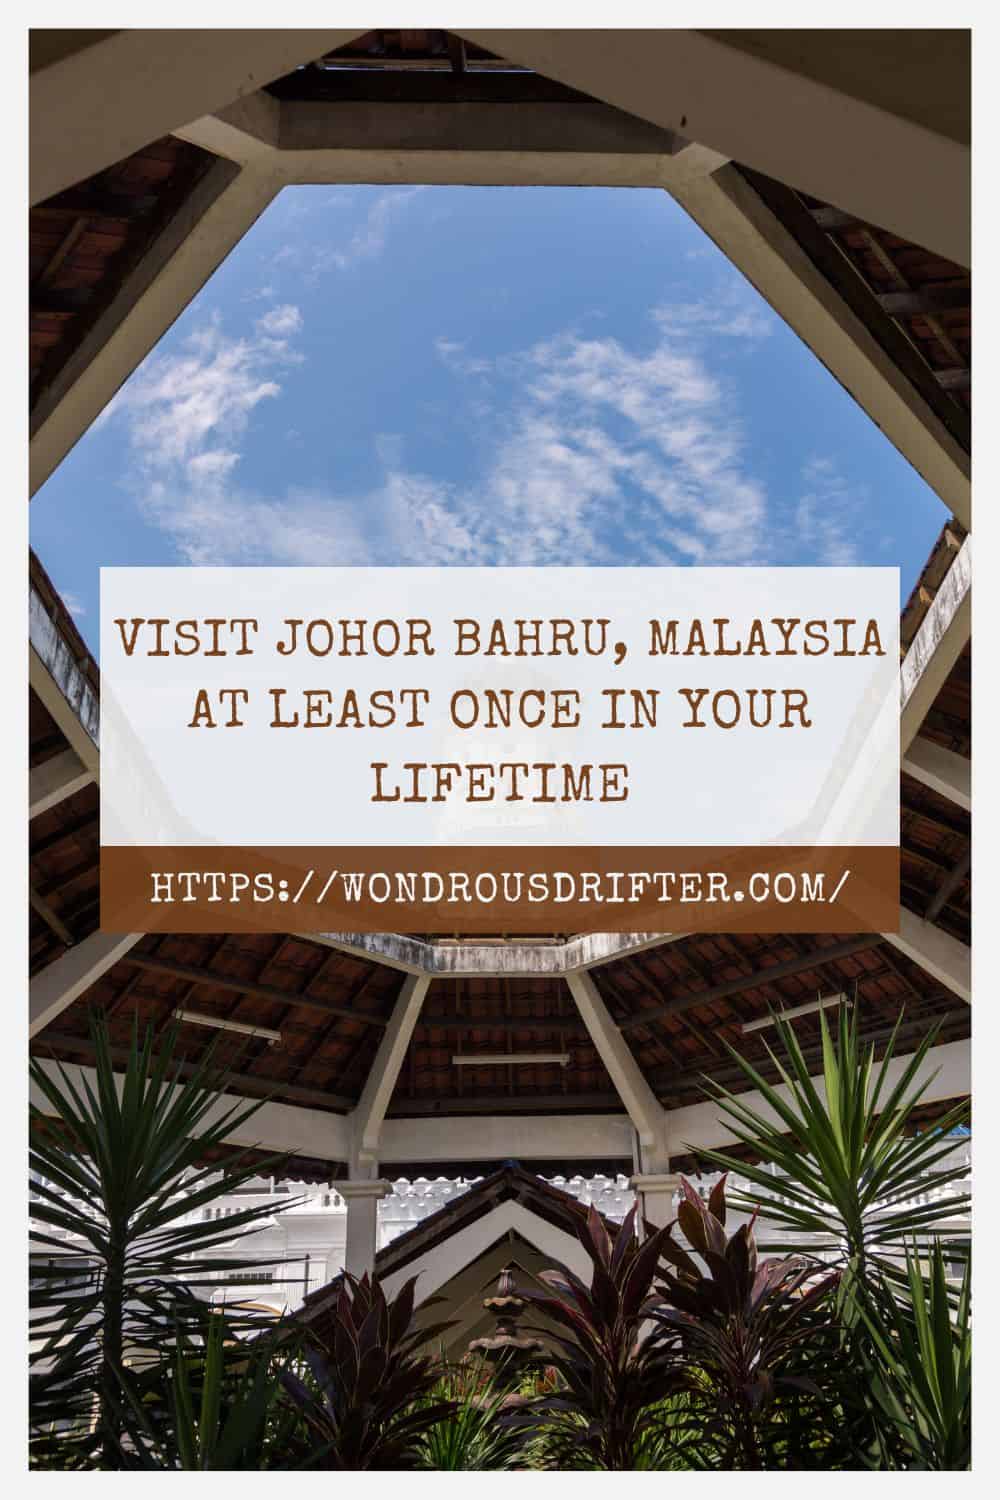 Visit Johor Bahru Malaysia at least once in your lifetime